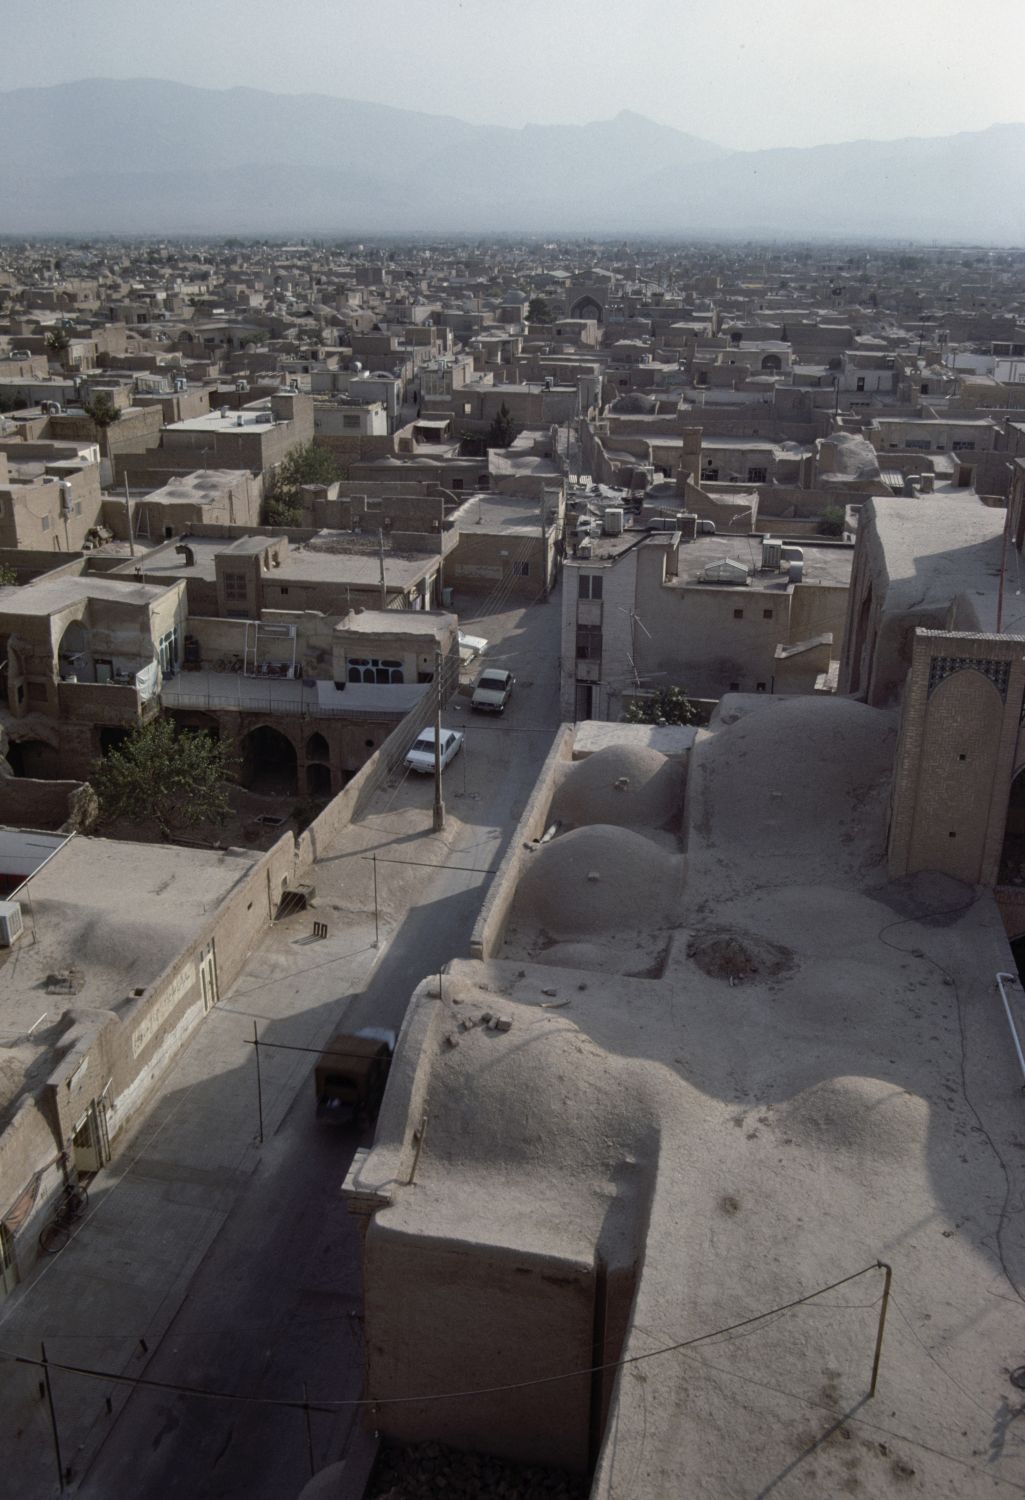 View over city facing south, taken from the minaret of the&nbsp;<a href="https://archnet.org/sites/1628" target="_blank" data-bypass="true">Great Mosque</a>.